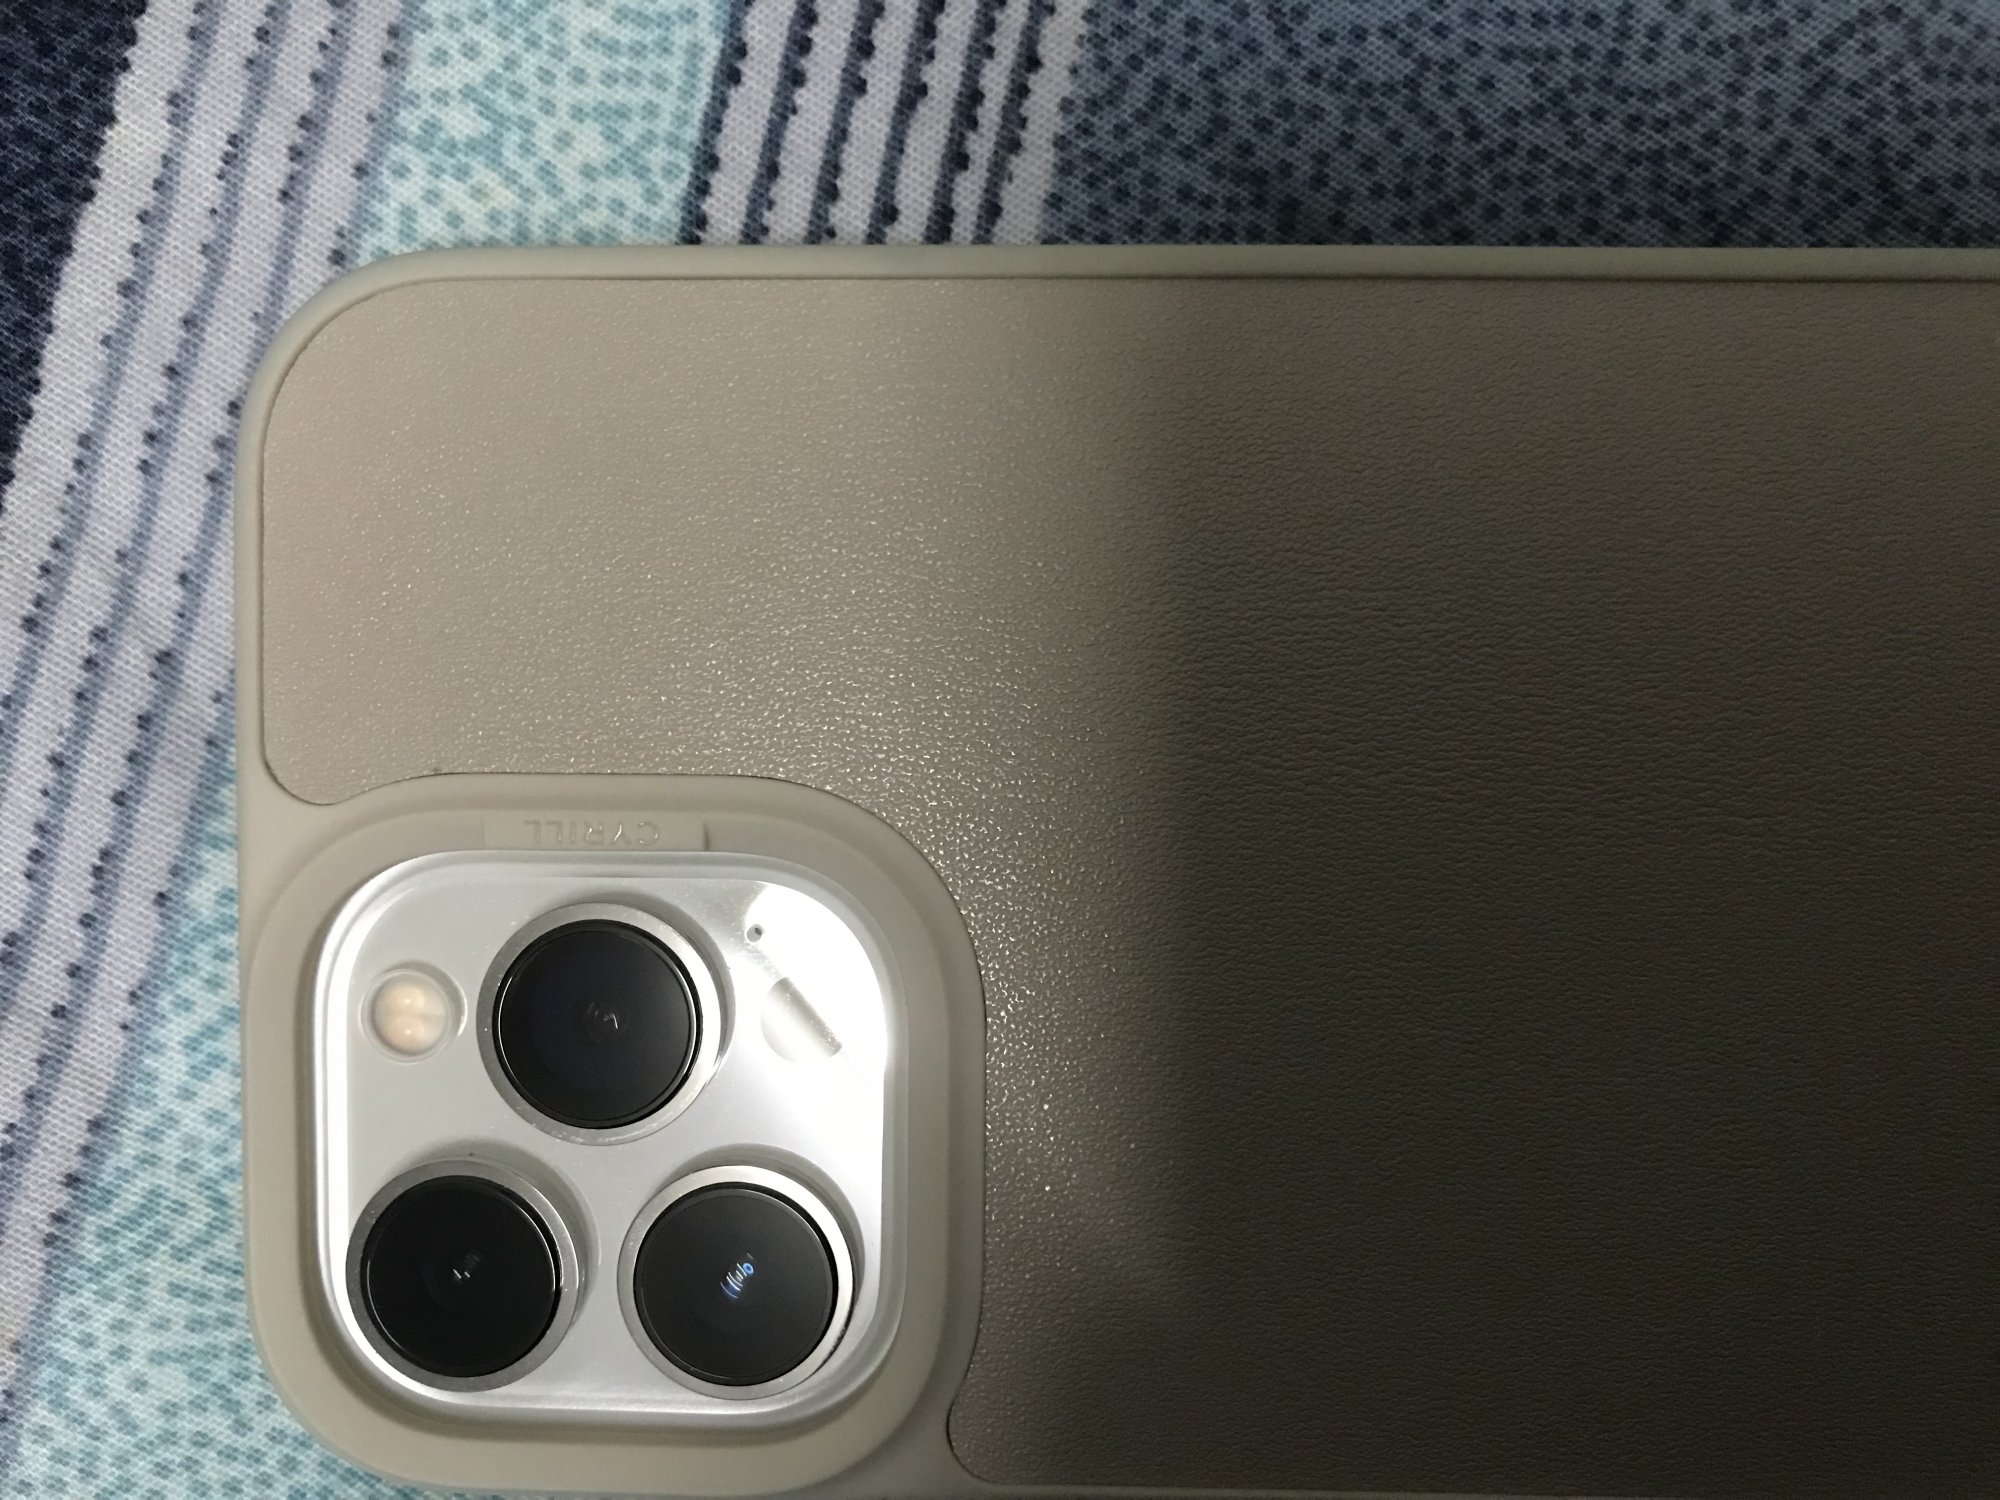 How hard is it to scratch iPhone 13 Pro camera?